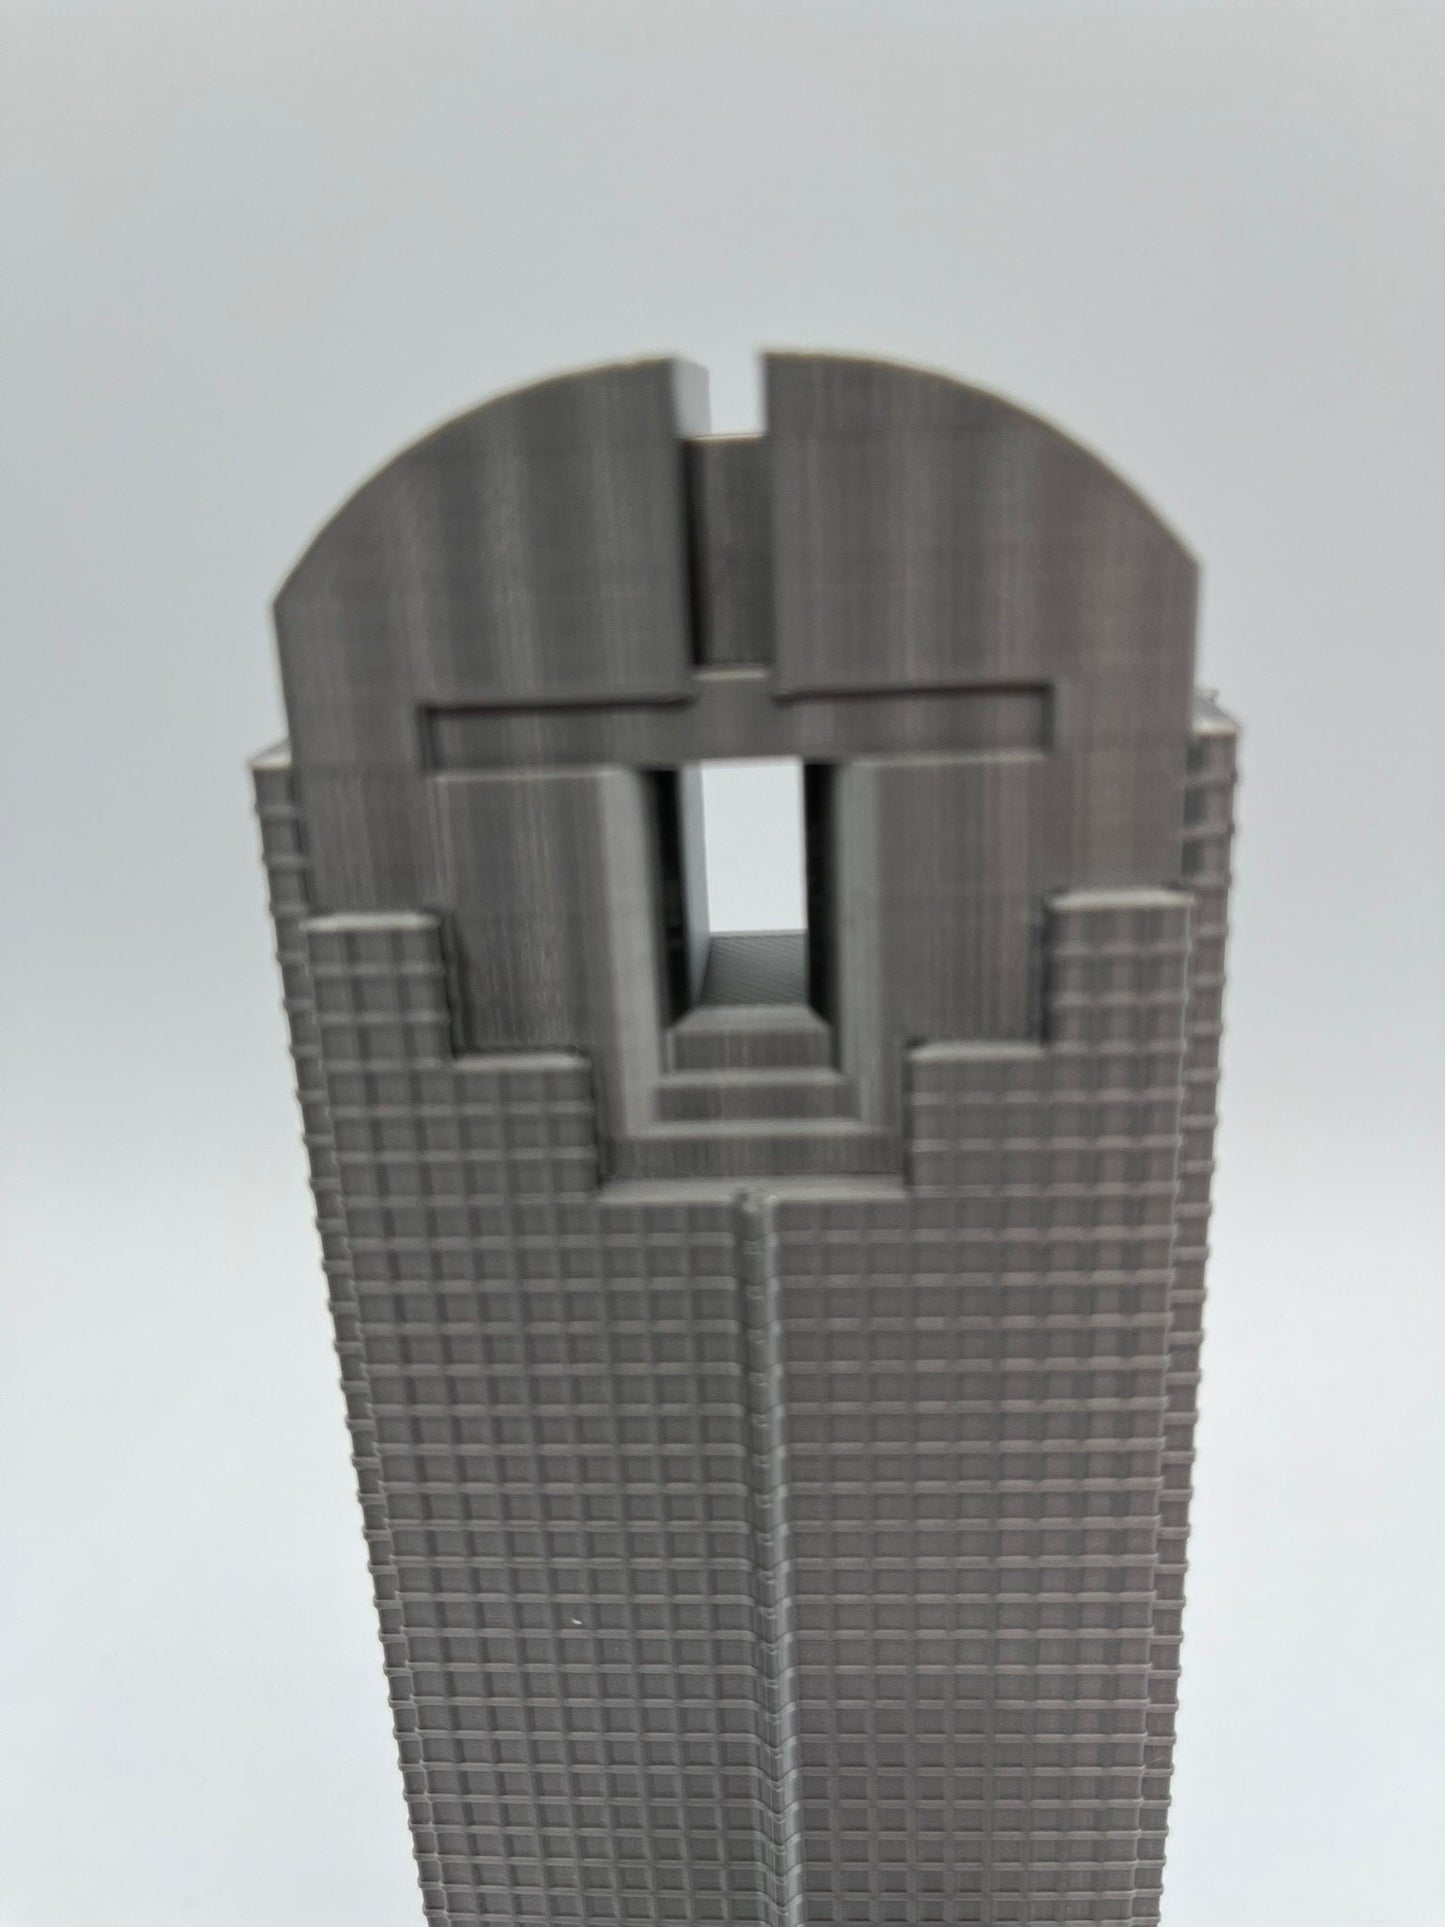 Chase Tower Dallas Model- 3D Printed